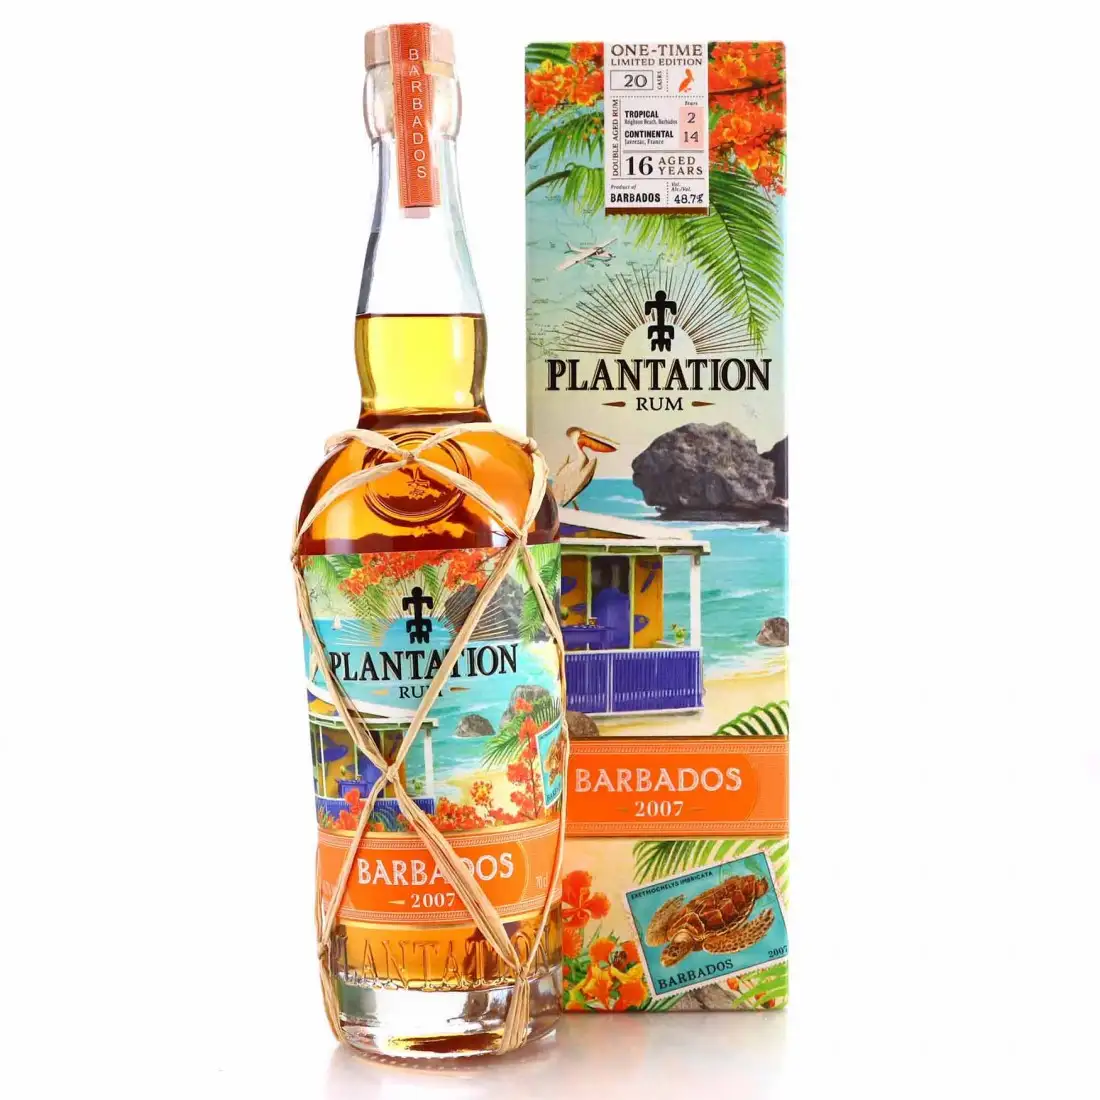 Image of the front of the bottle of the rum Plantation Barbados One-Time Edition